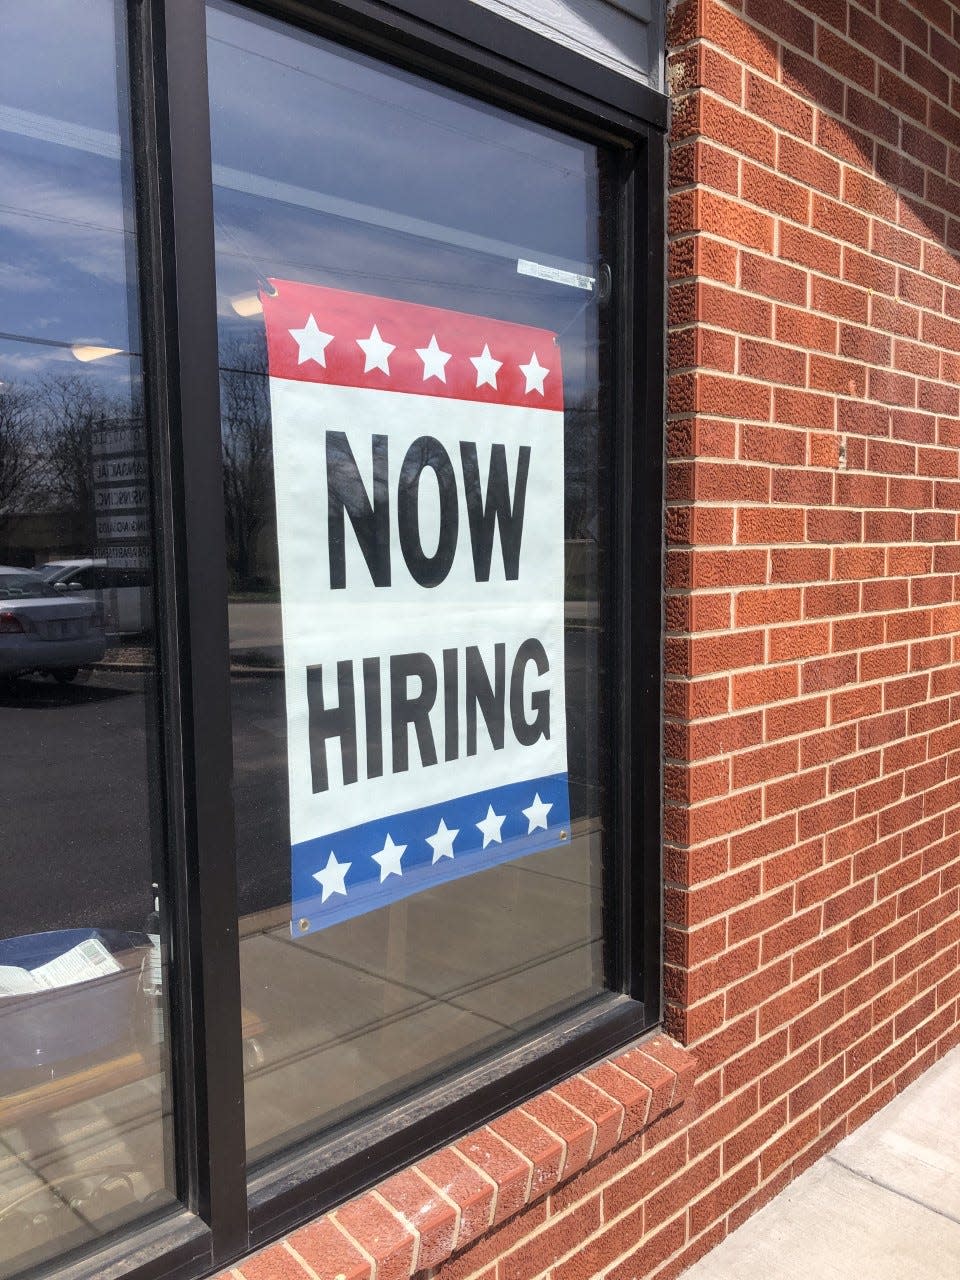 Life Patterns Inc., 3300 S.W. 29th St., Suite 100, displays a "now hiring" sign prominently in its window.